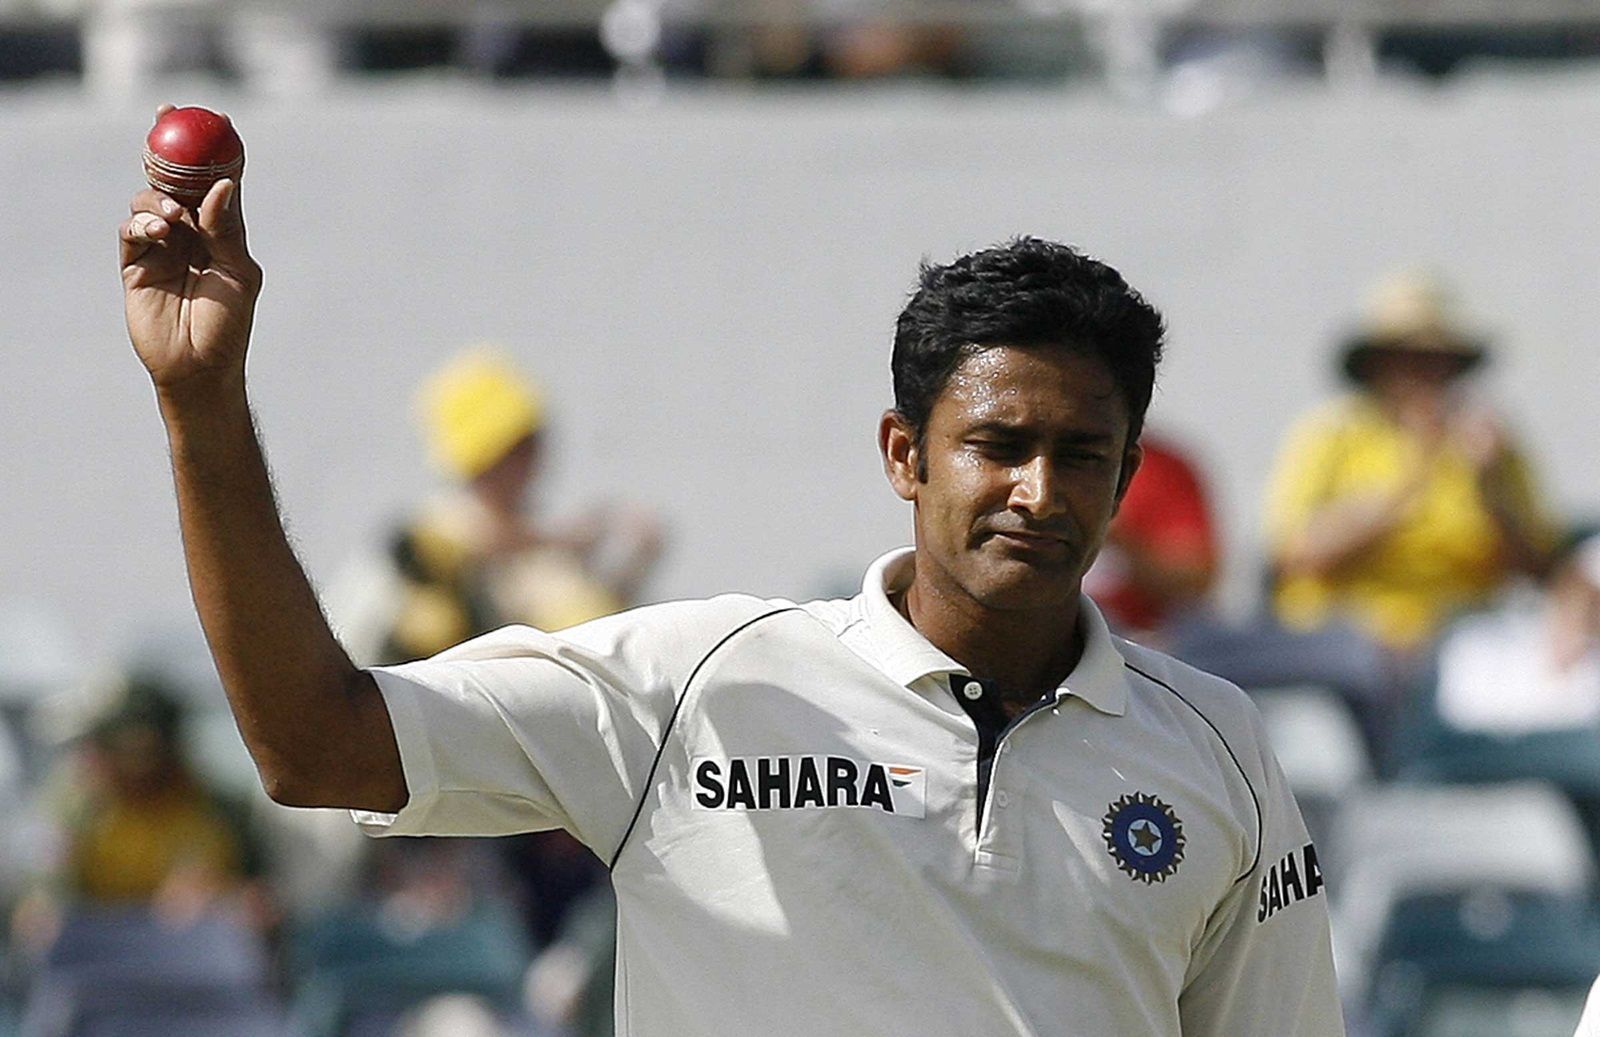 Anil Kumble is the highest wicket-taker for India in Tests with 619 wickets to his name